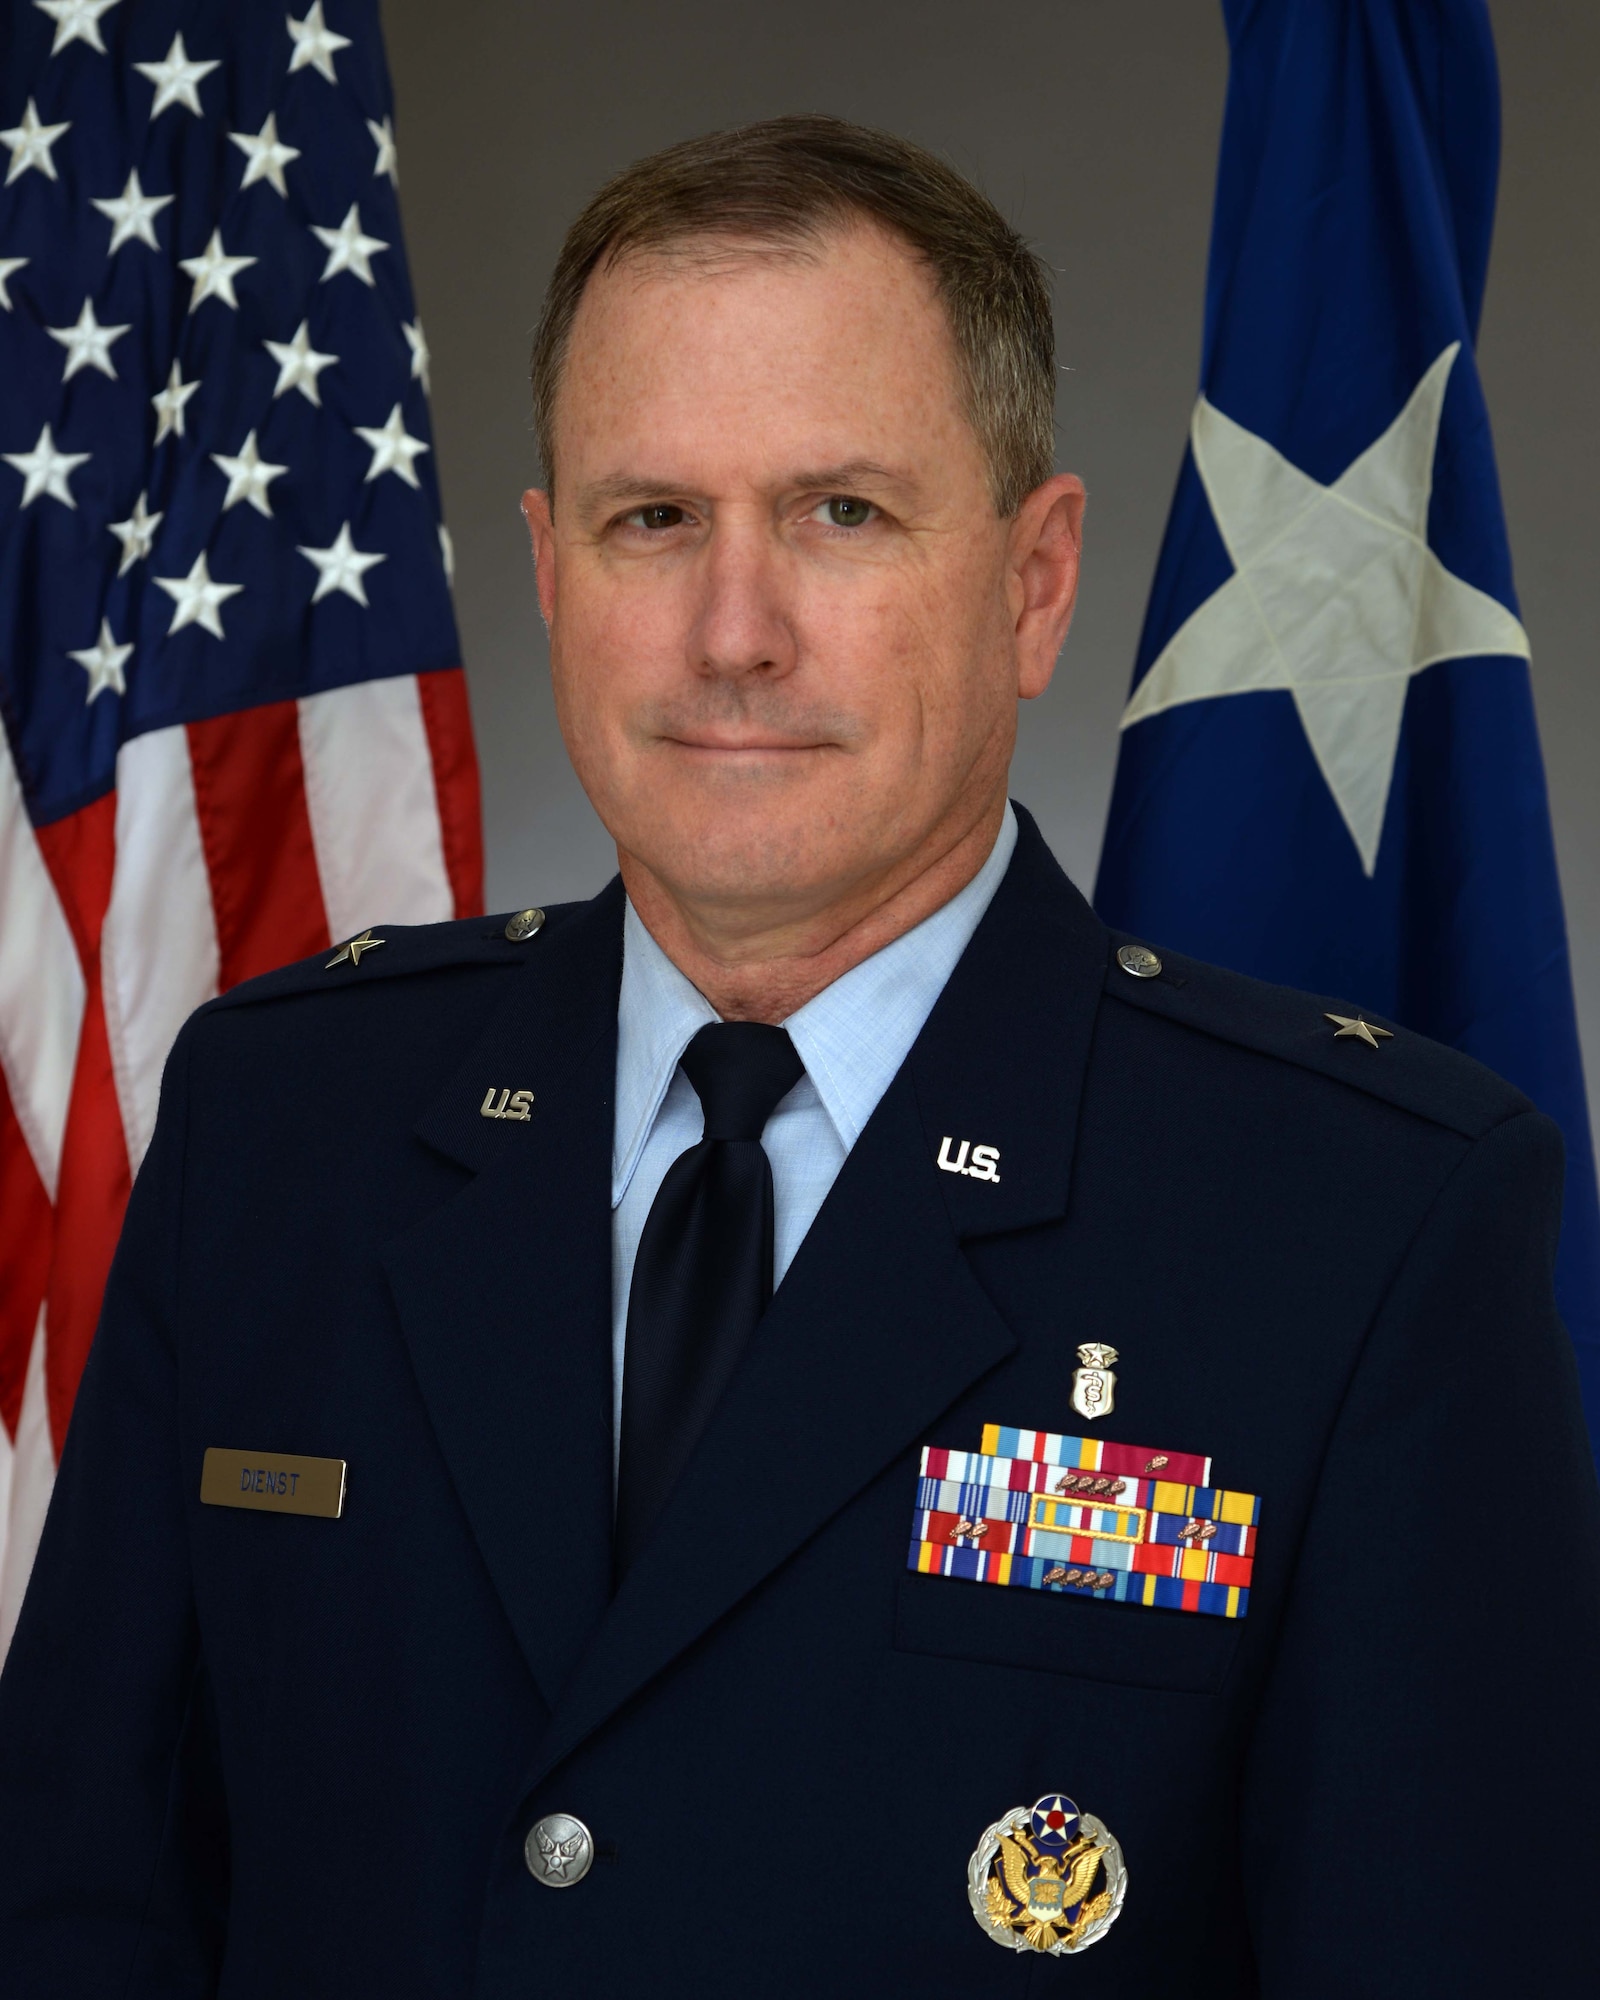 Brig. Gen. (Dr.) James H. Dienst assumed command of the Air Force Research Laboratory’s 711th Human Performance Wing June 21 in a change of command ceremony at the National Museum of the United States Air Force at Wright-Patterson Air Force Base, Ohio. (U.S. Air Force photo/courtesy photo)